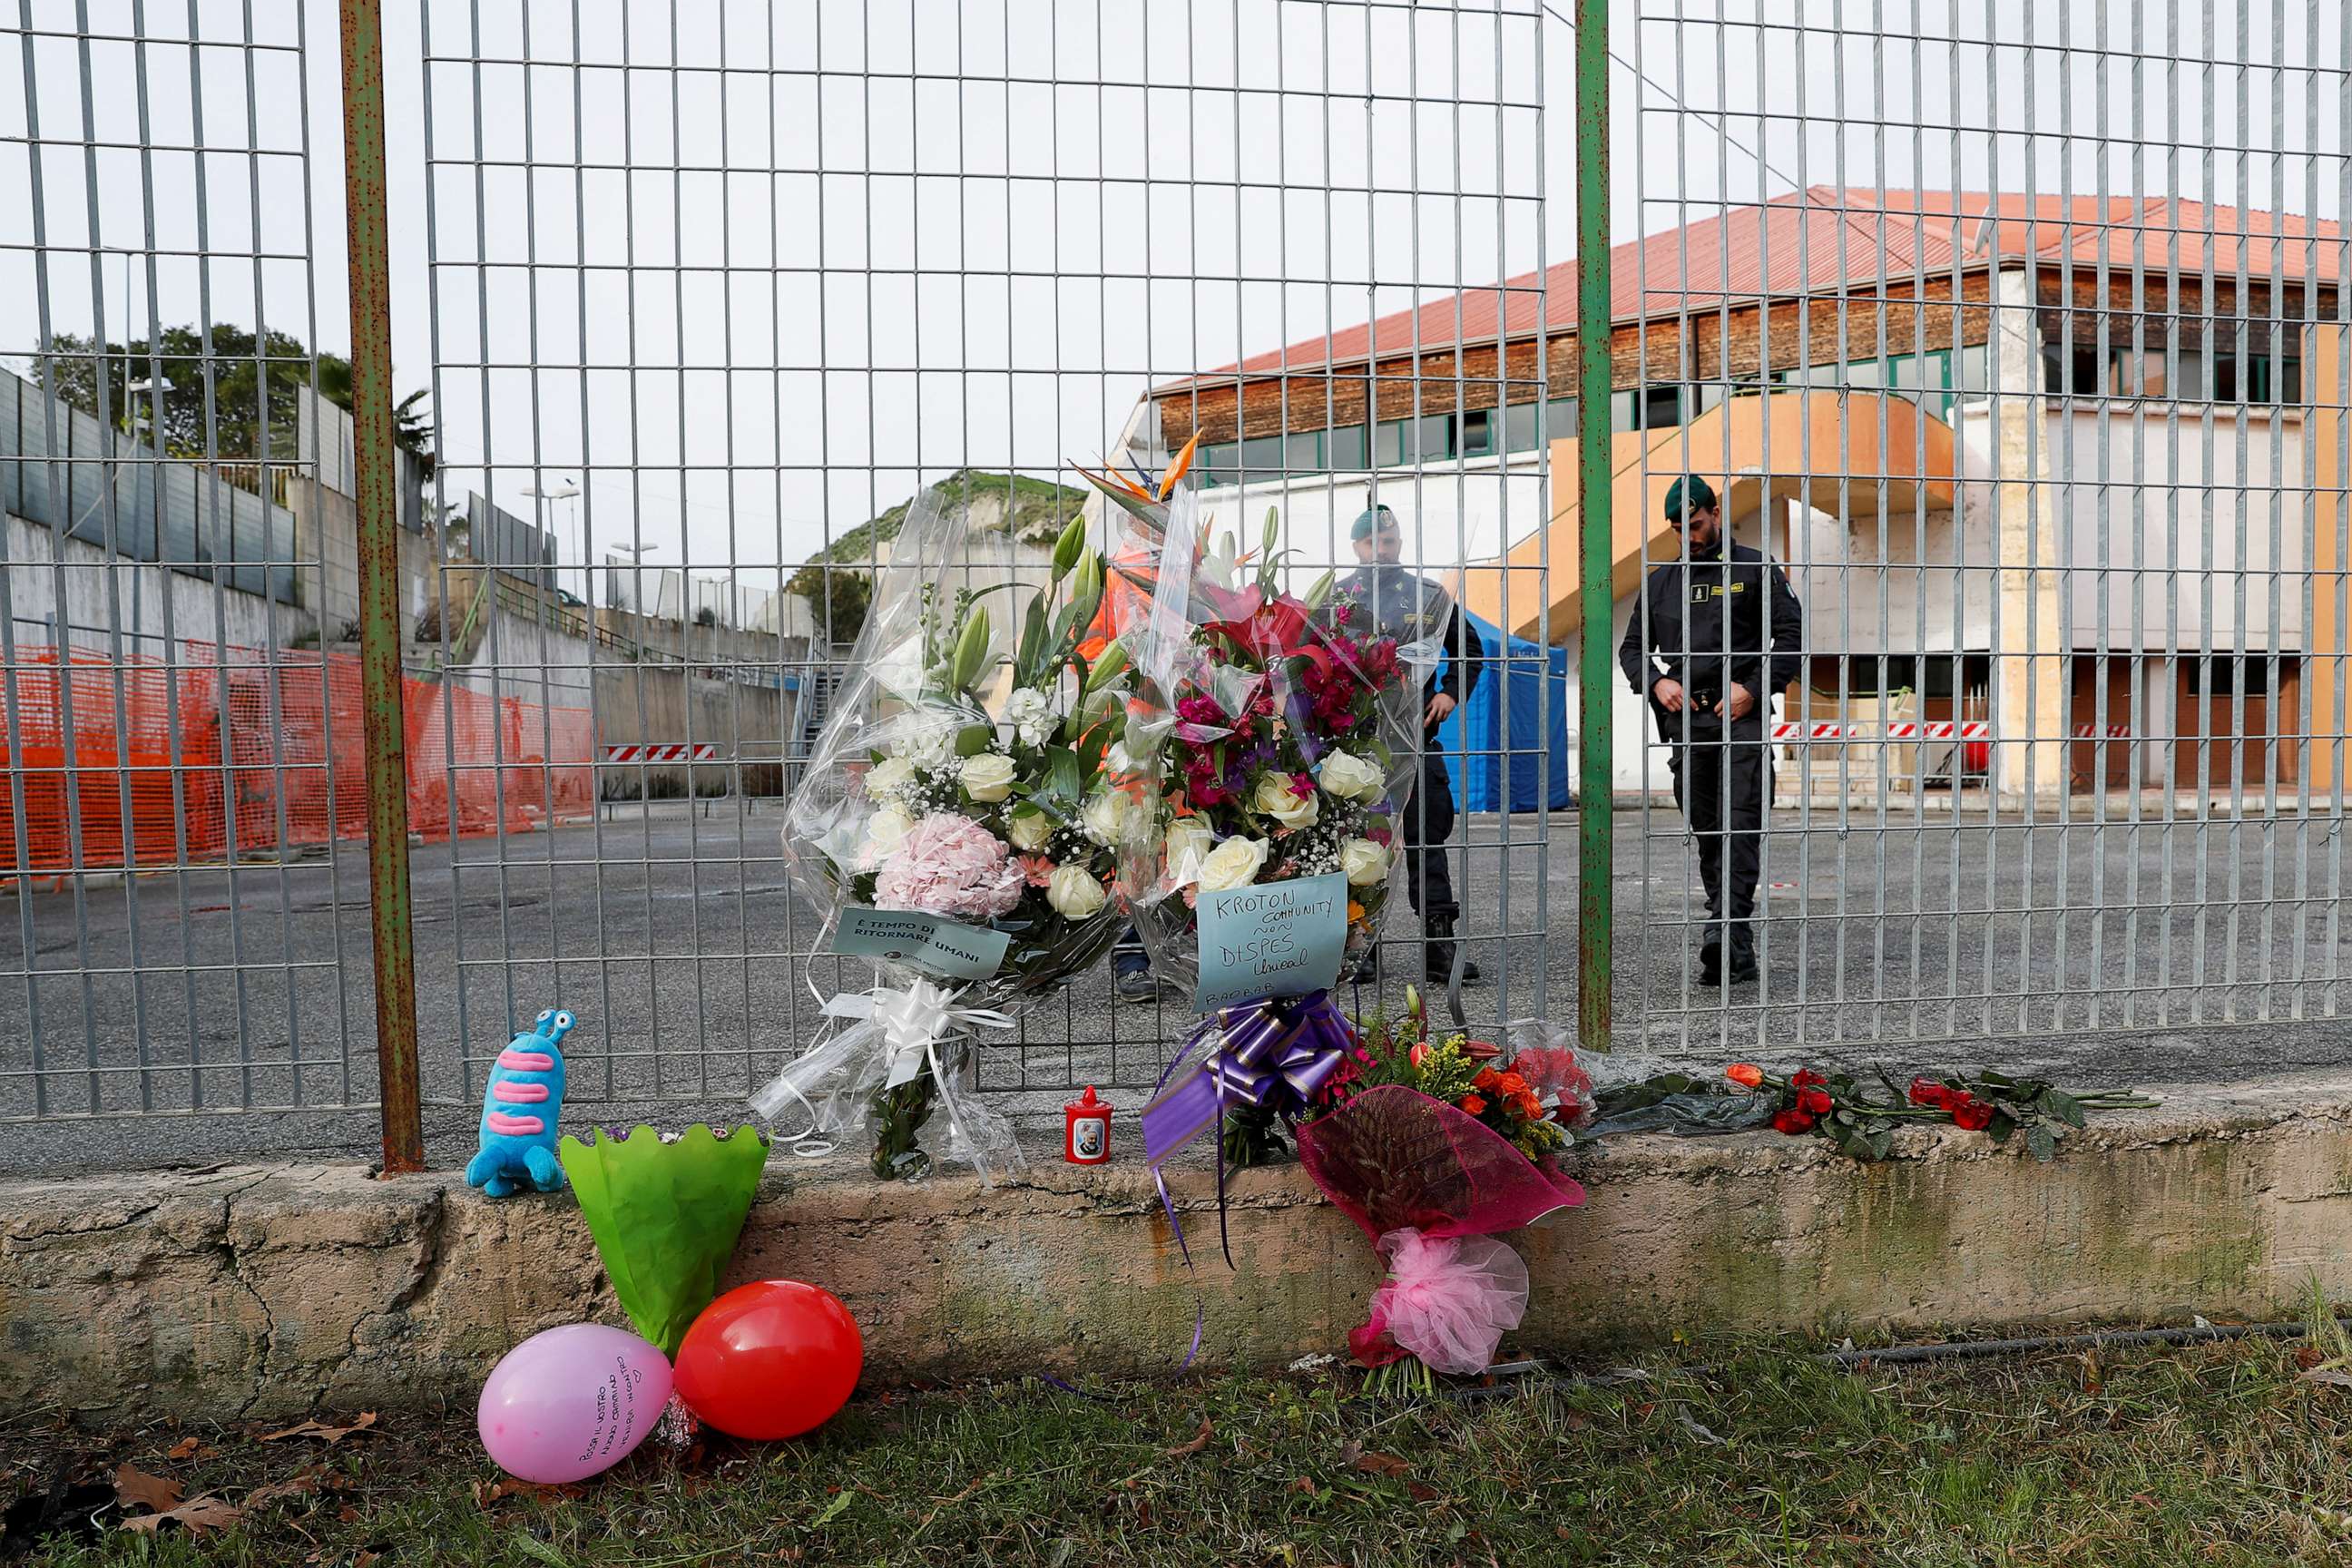 PHOTO: Members of the Guardia di Finanza stand next to floral tributes laid at the fence of PalaMilone sports hall, where victims of a deadly migrant shipwreck are being held, in Crotone, Italy, Feb. 27, 2023.